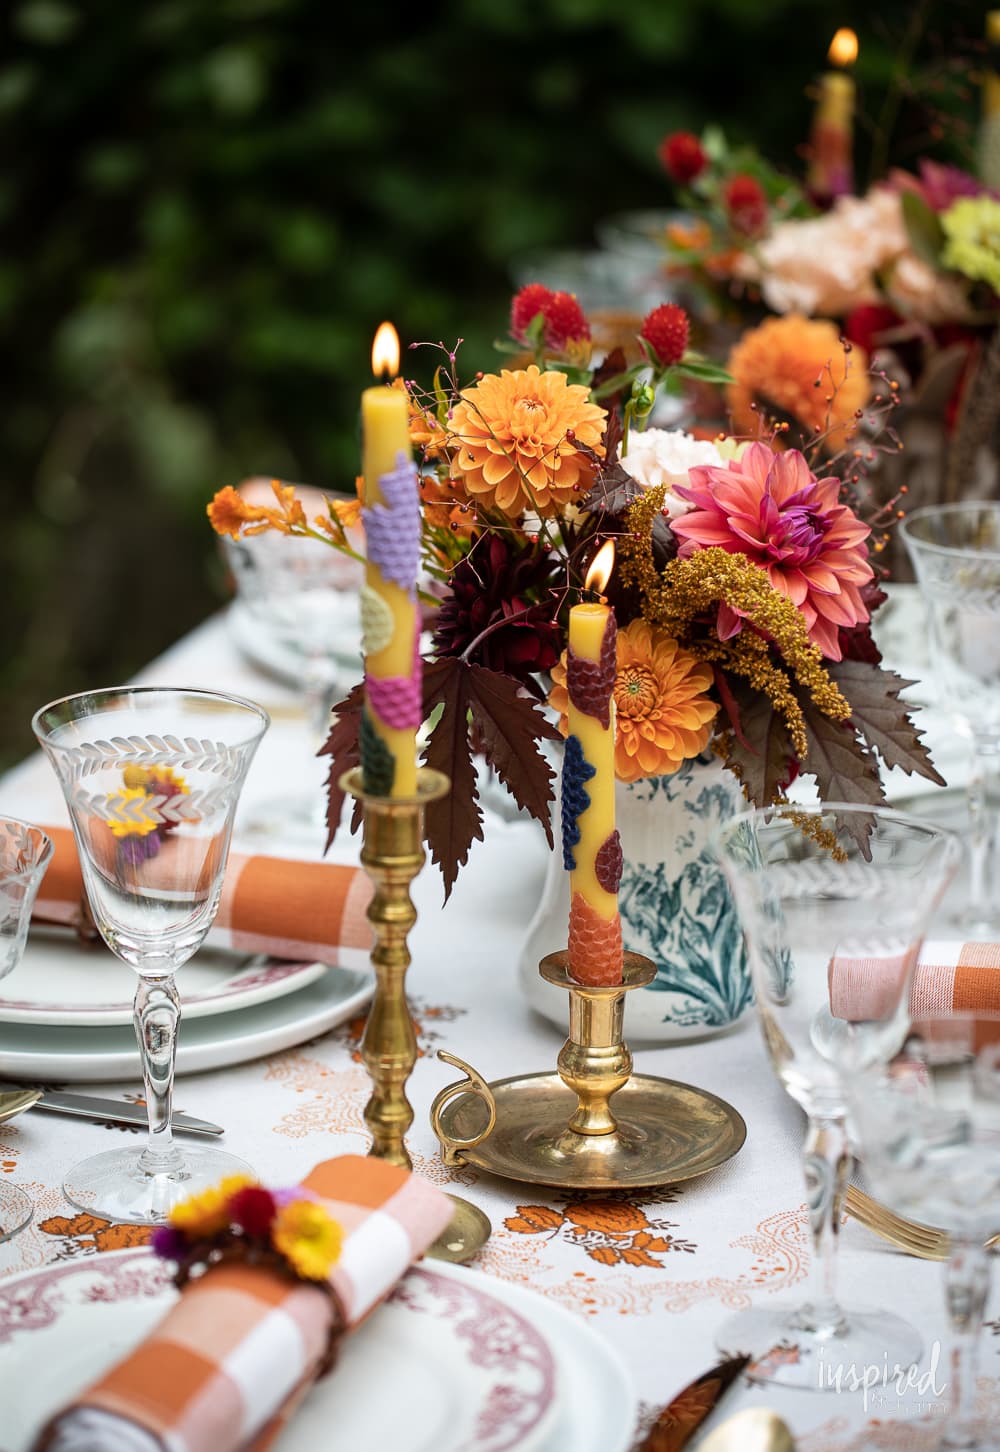 vintage-inspired all tablescape with candles and vintage glassware.